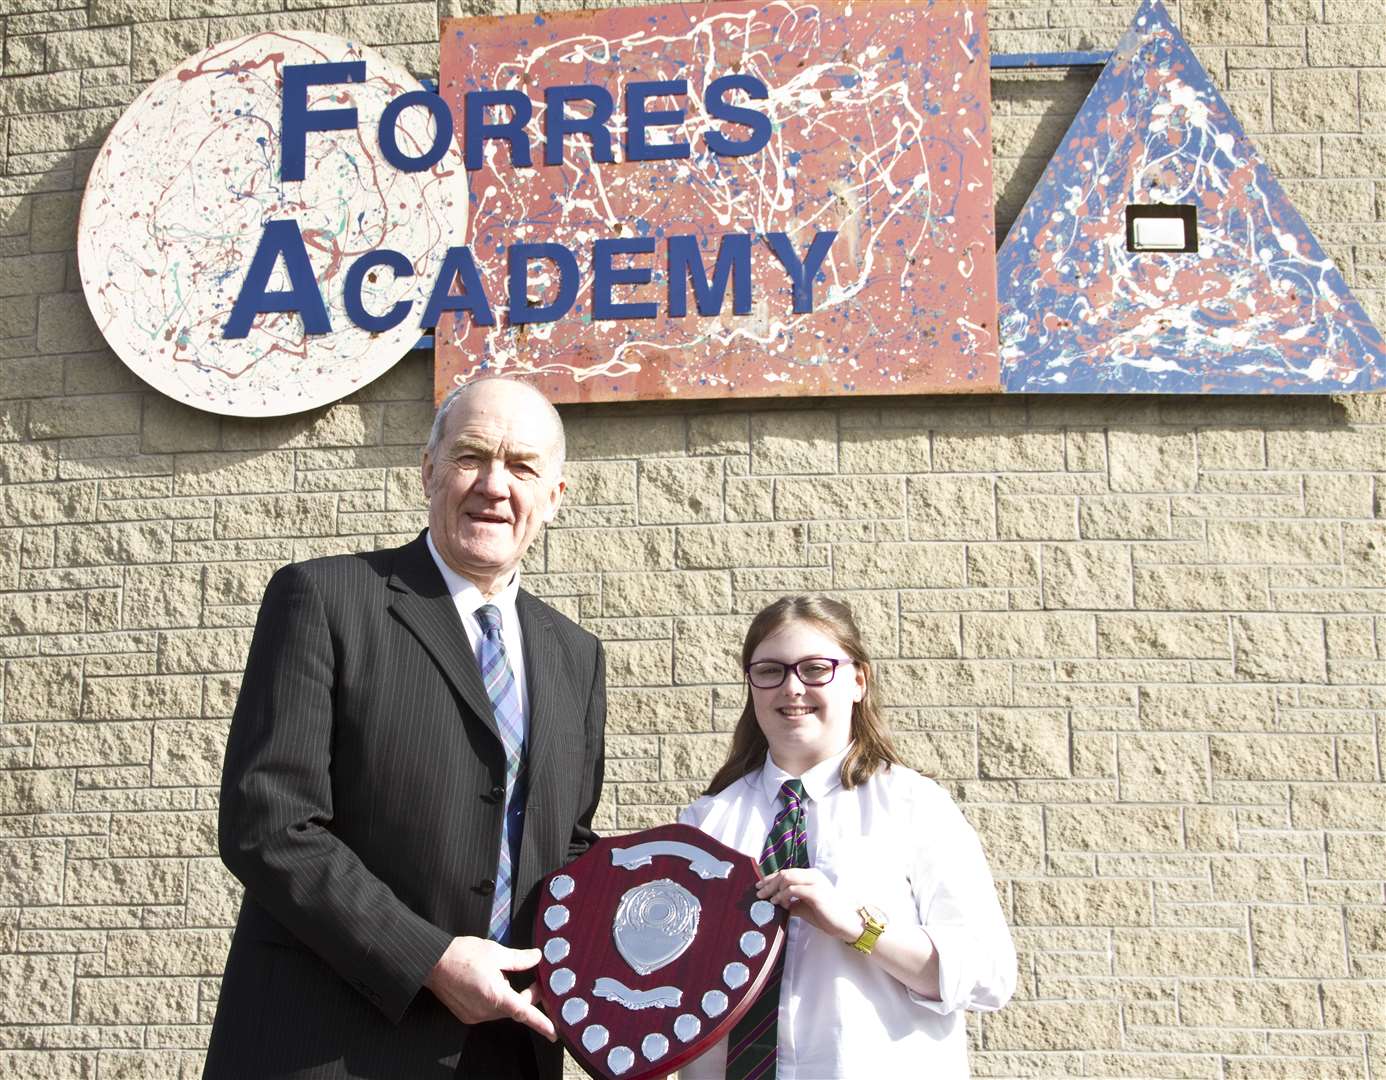 S5 pupil Kerry Niven-Gordon was presented with the Community Shield by George Alexander of Youth Concert organisers Forres Community Activities Association.